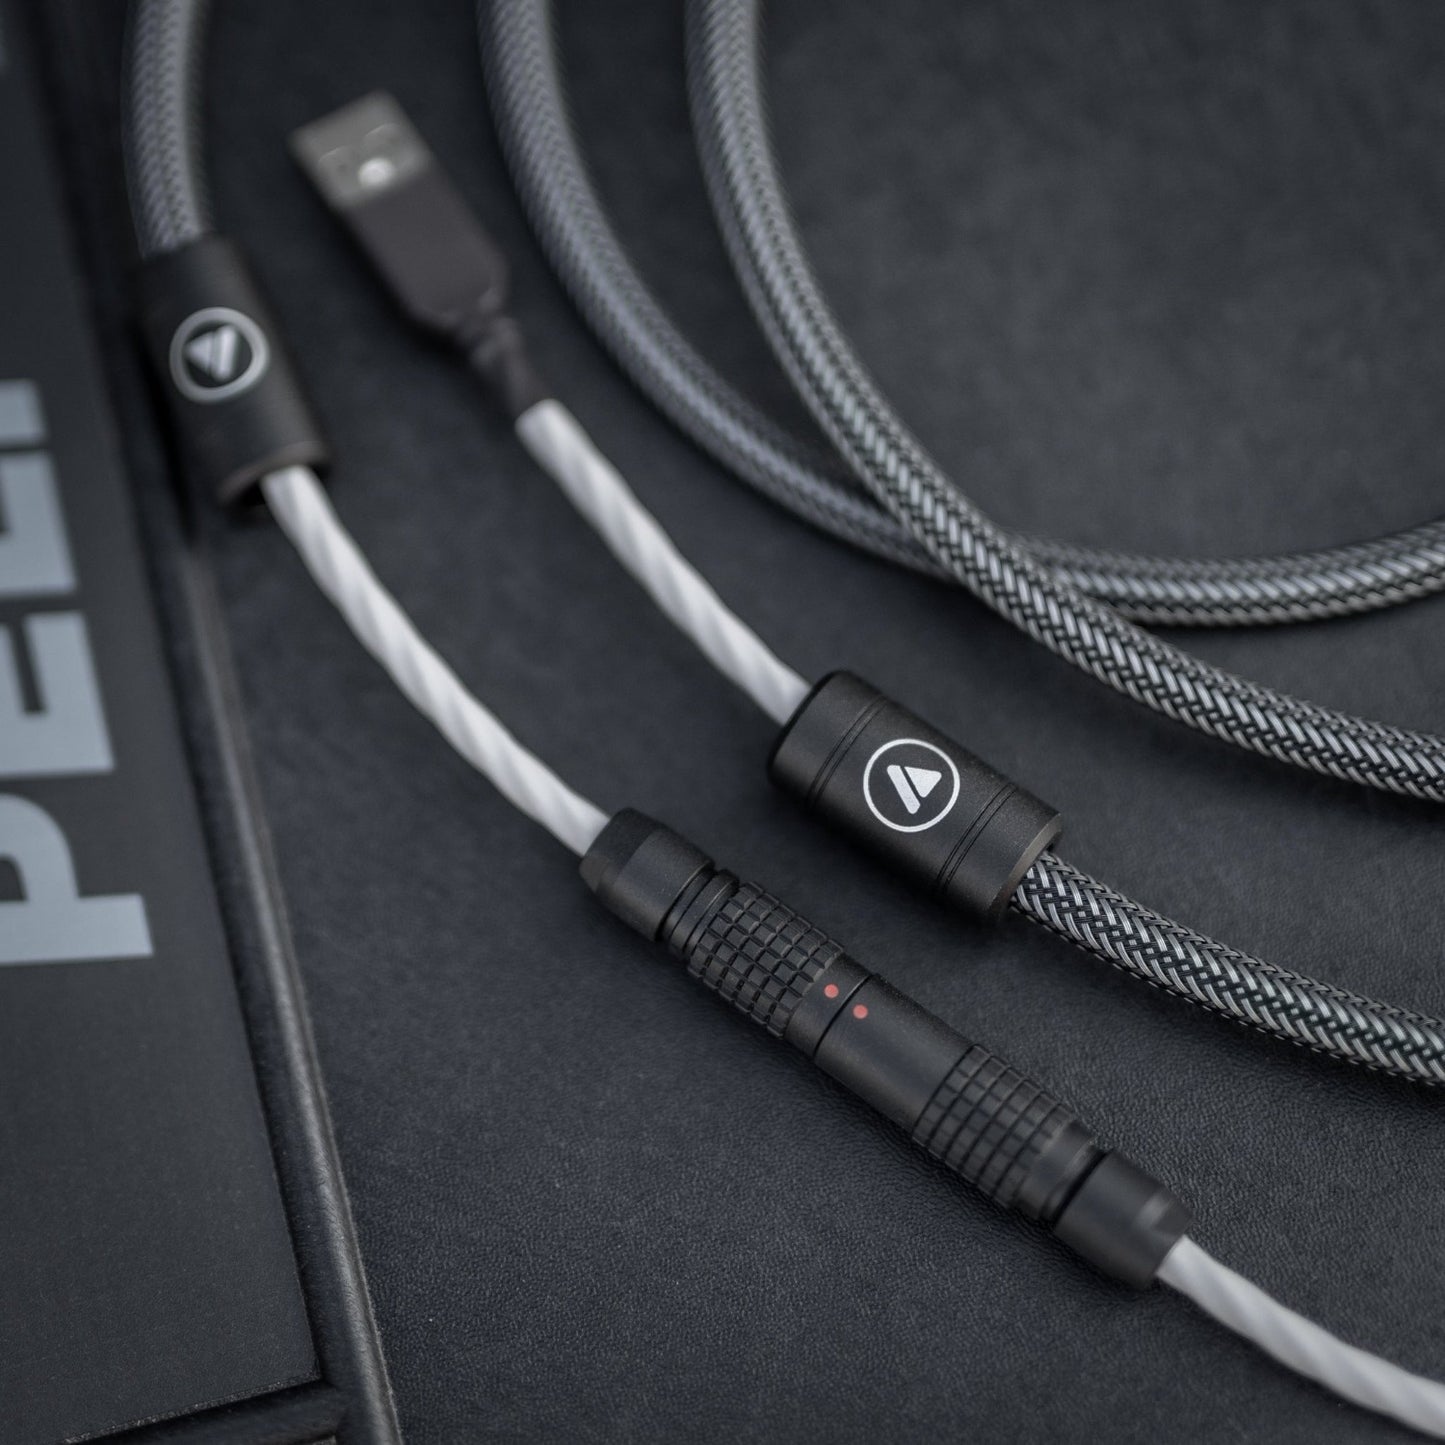 Custom, handmade mechanical keyboard cables. Audiophile style in MDPC-X with ViaBluie splitters and your choice of LEMO or Weipu detachable connectors 